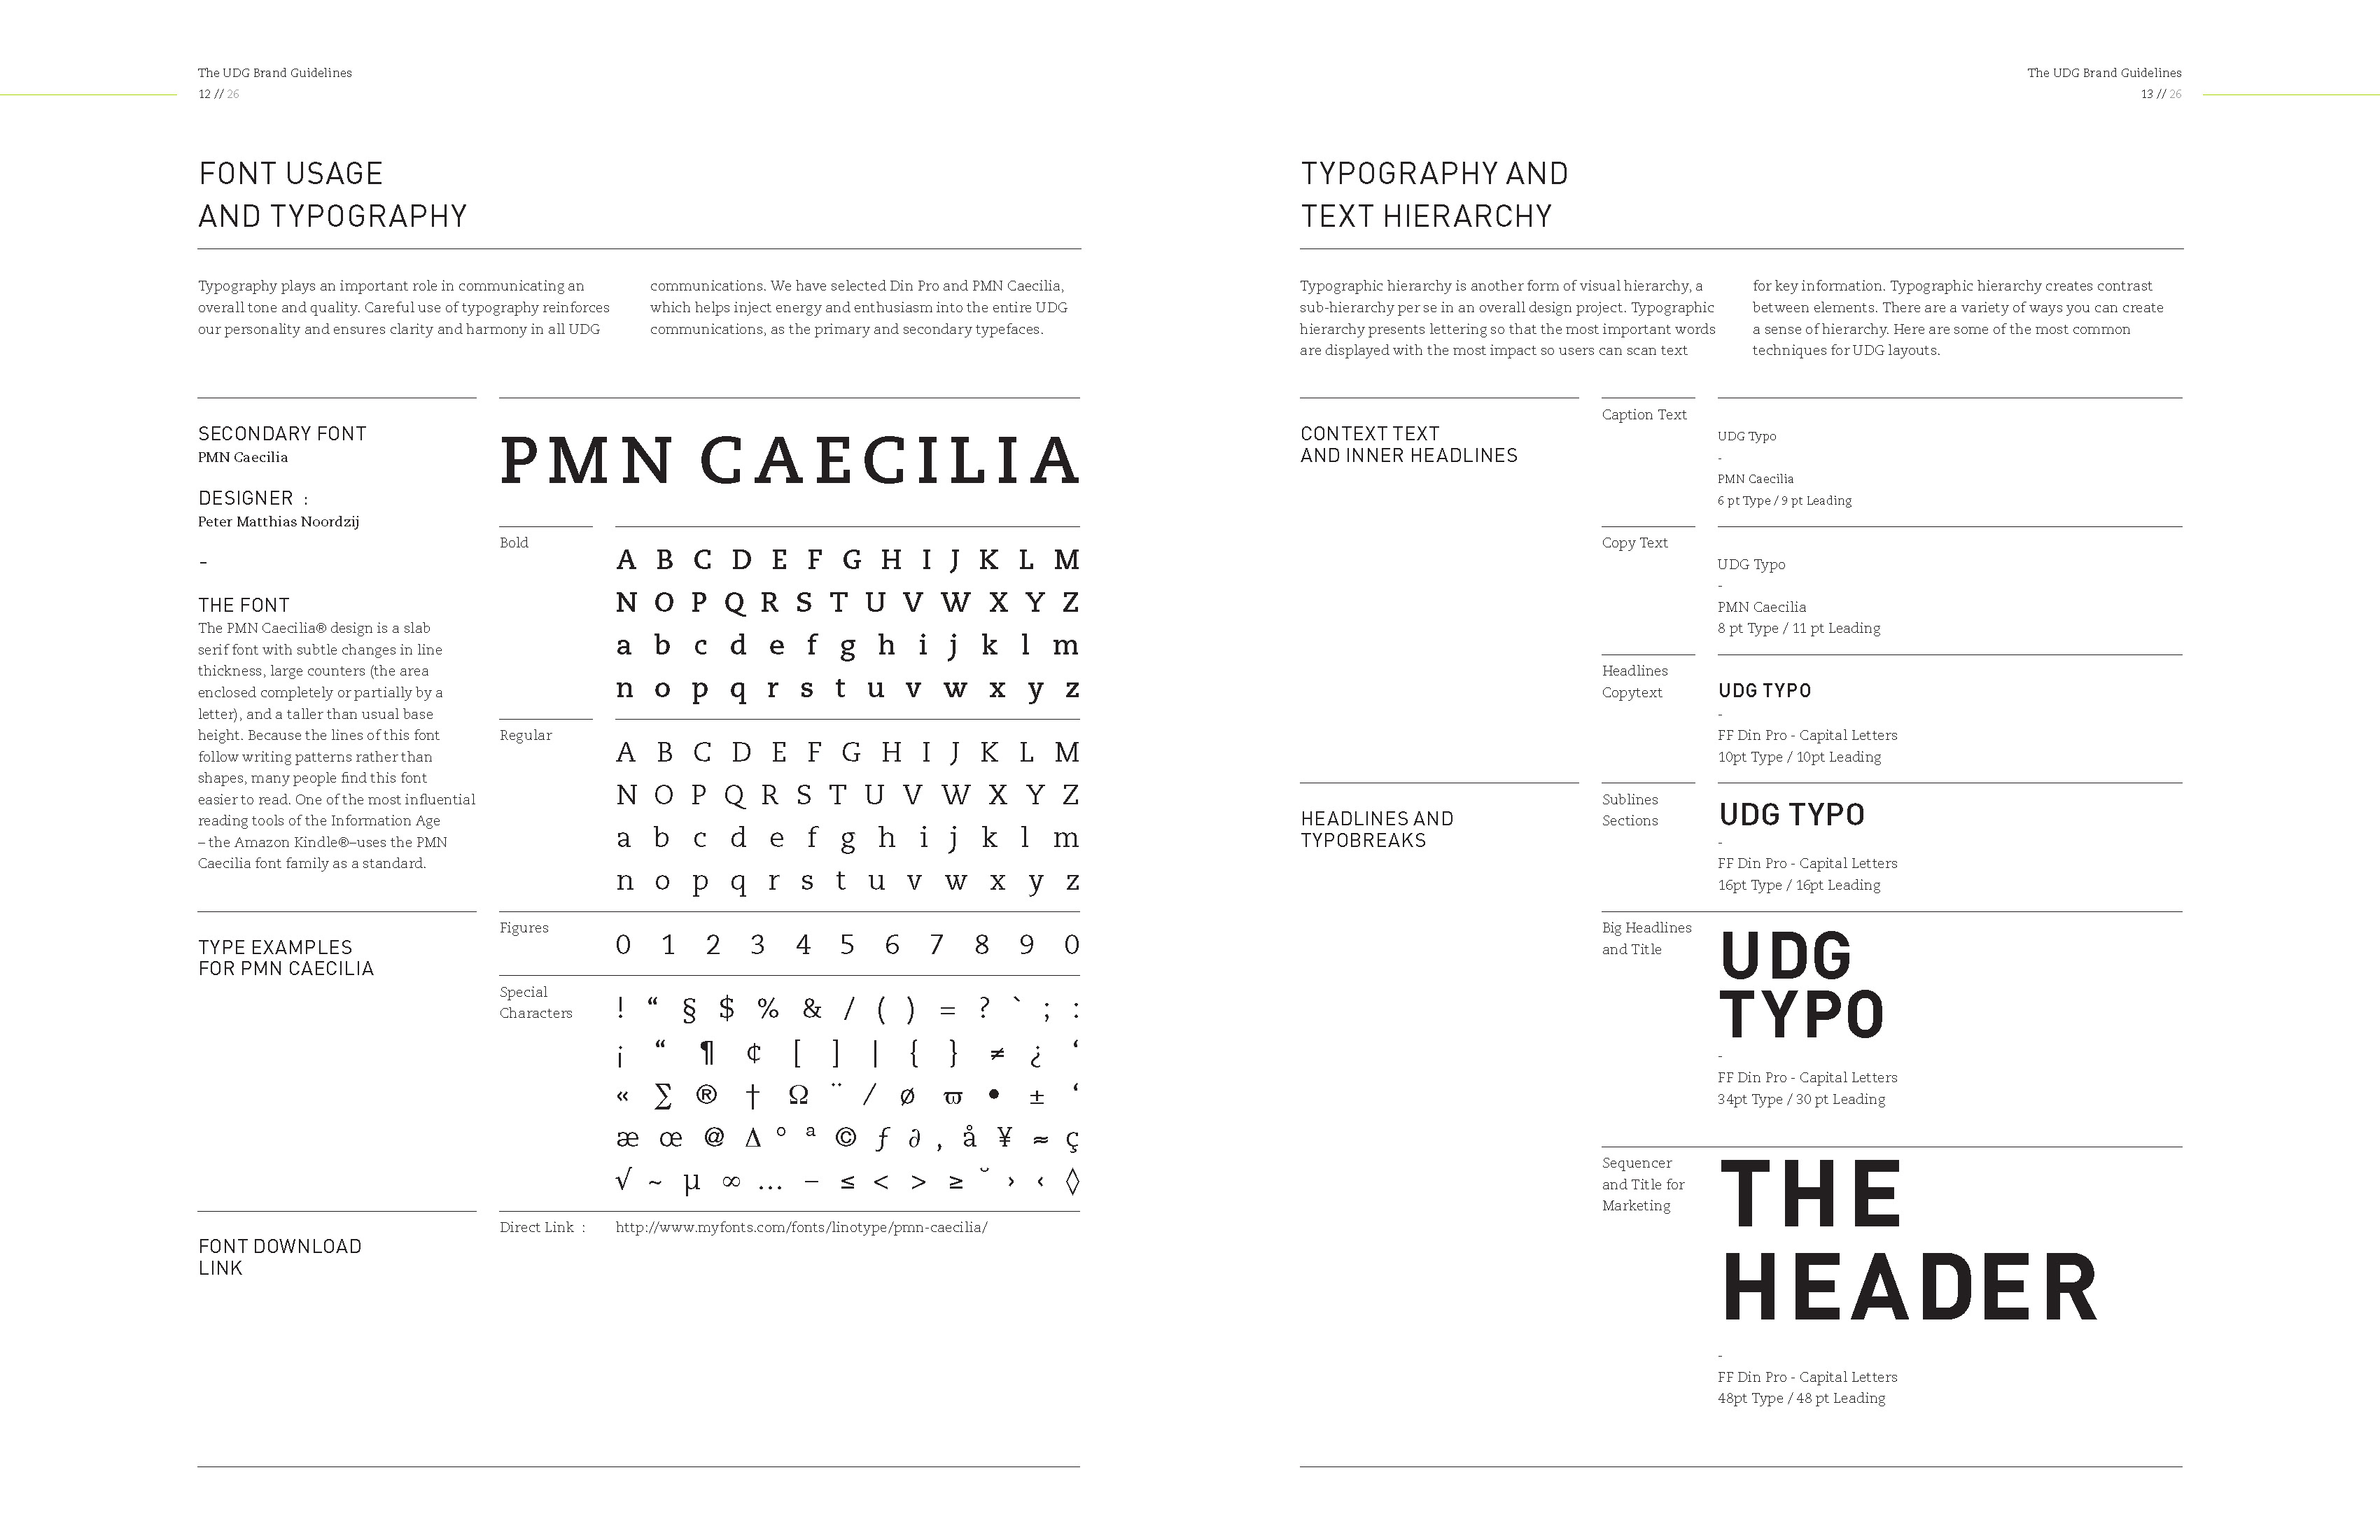 Urban Design Group Brand Guidelines